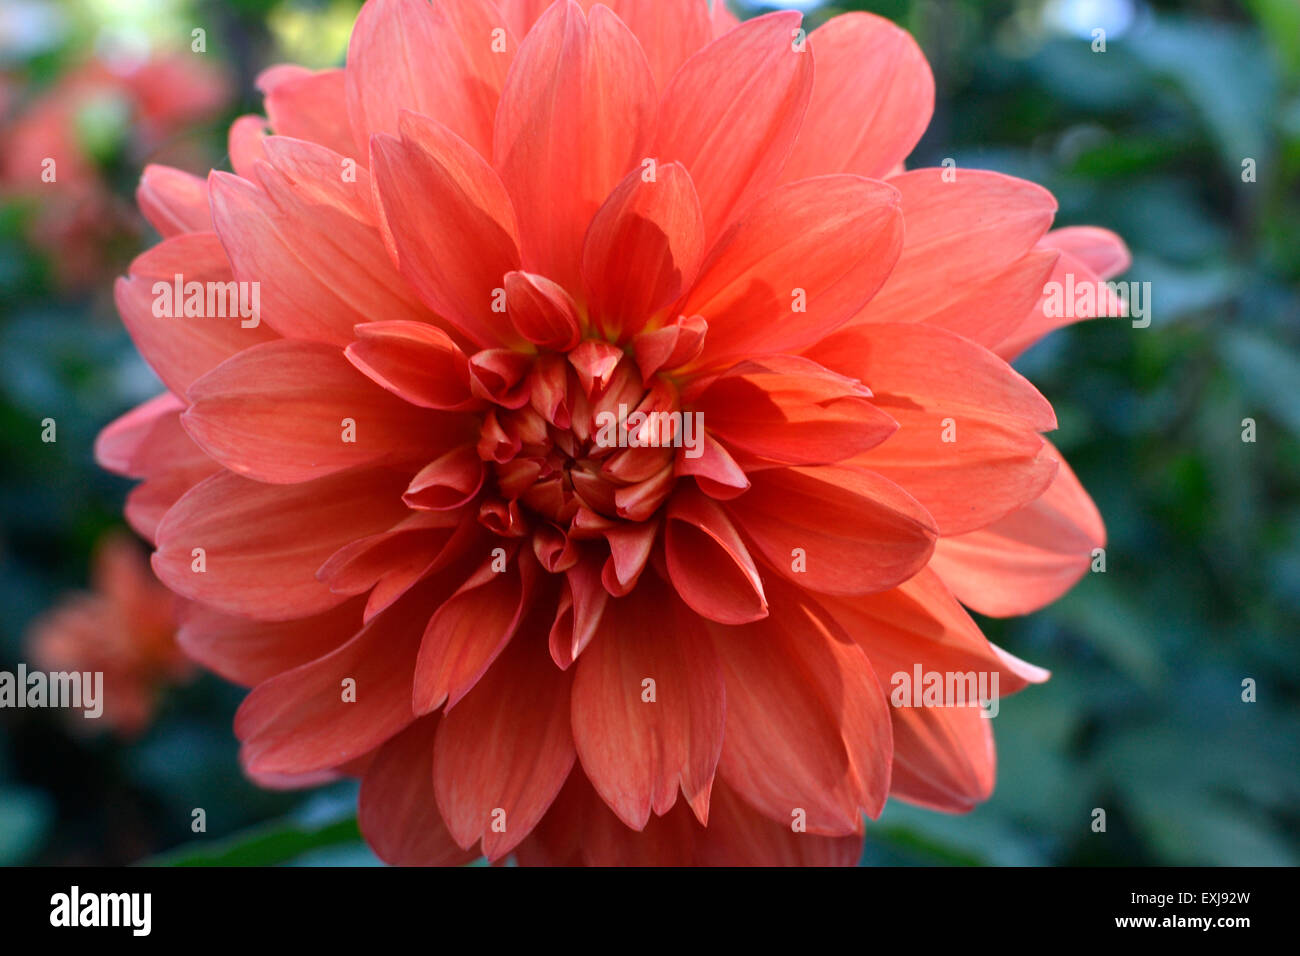 This is an orange/pink-ish flower that has cylinder shaped petals near the center. Stock Photo